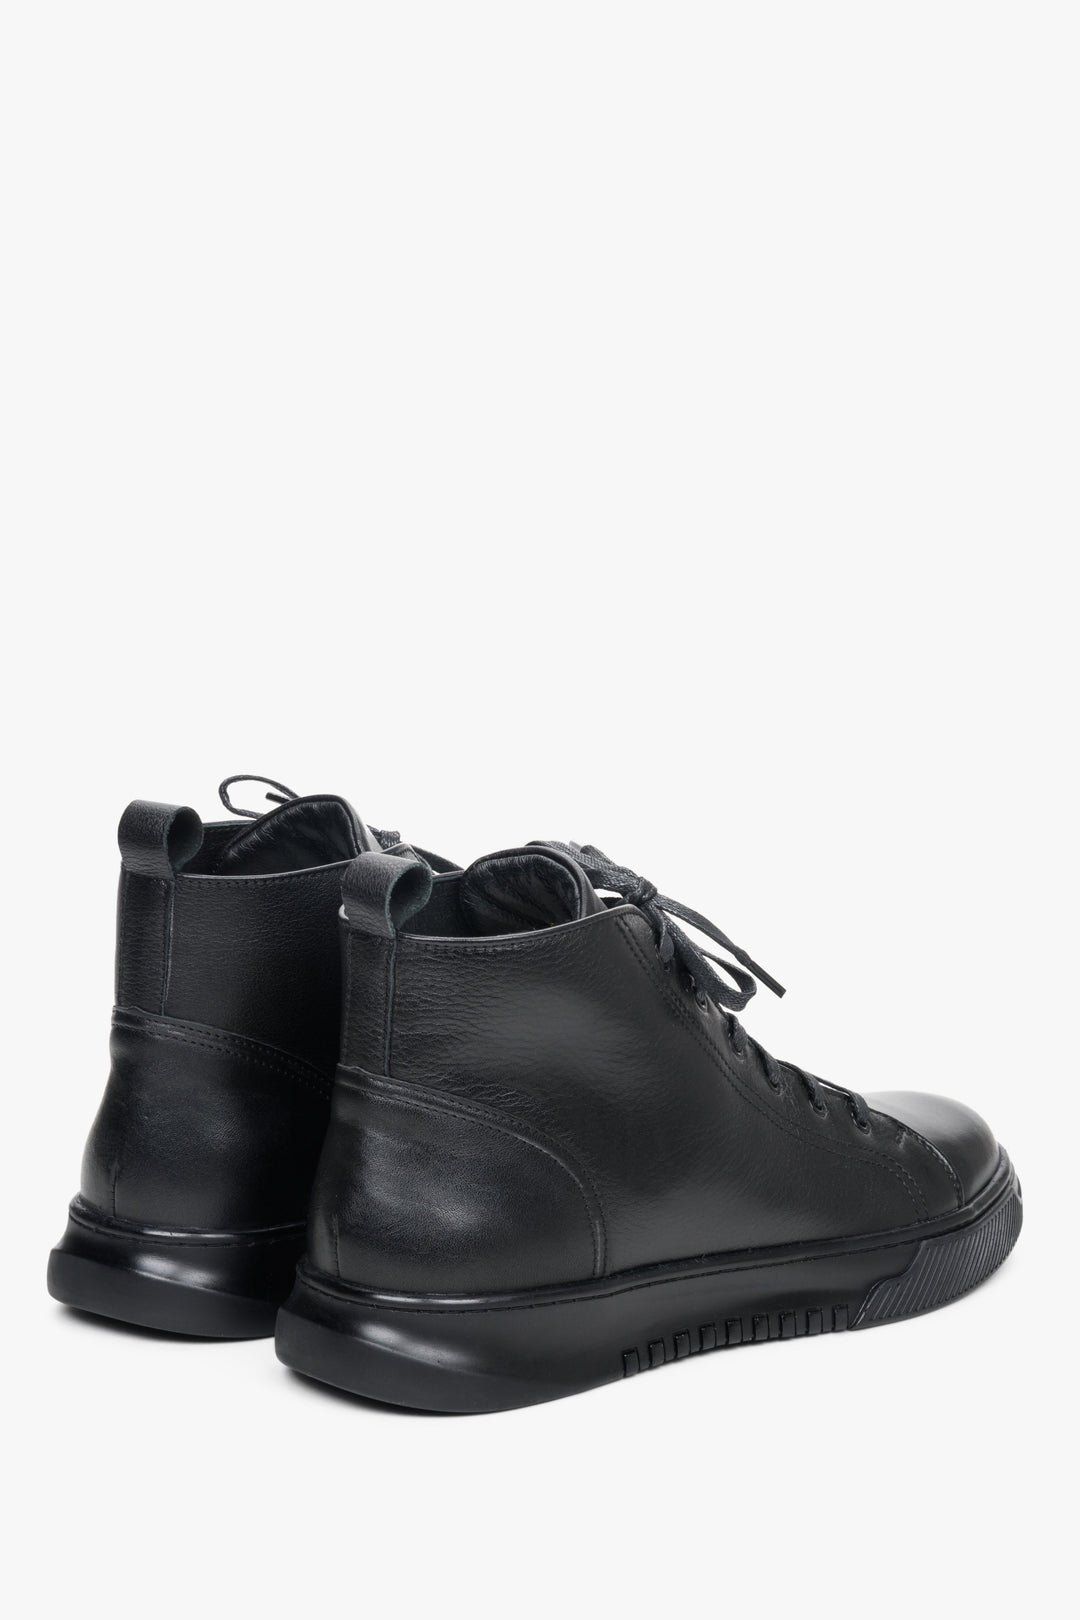 Men's sneakers in black color from natural leather Estro for winter.